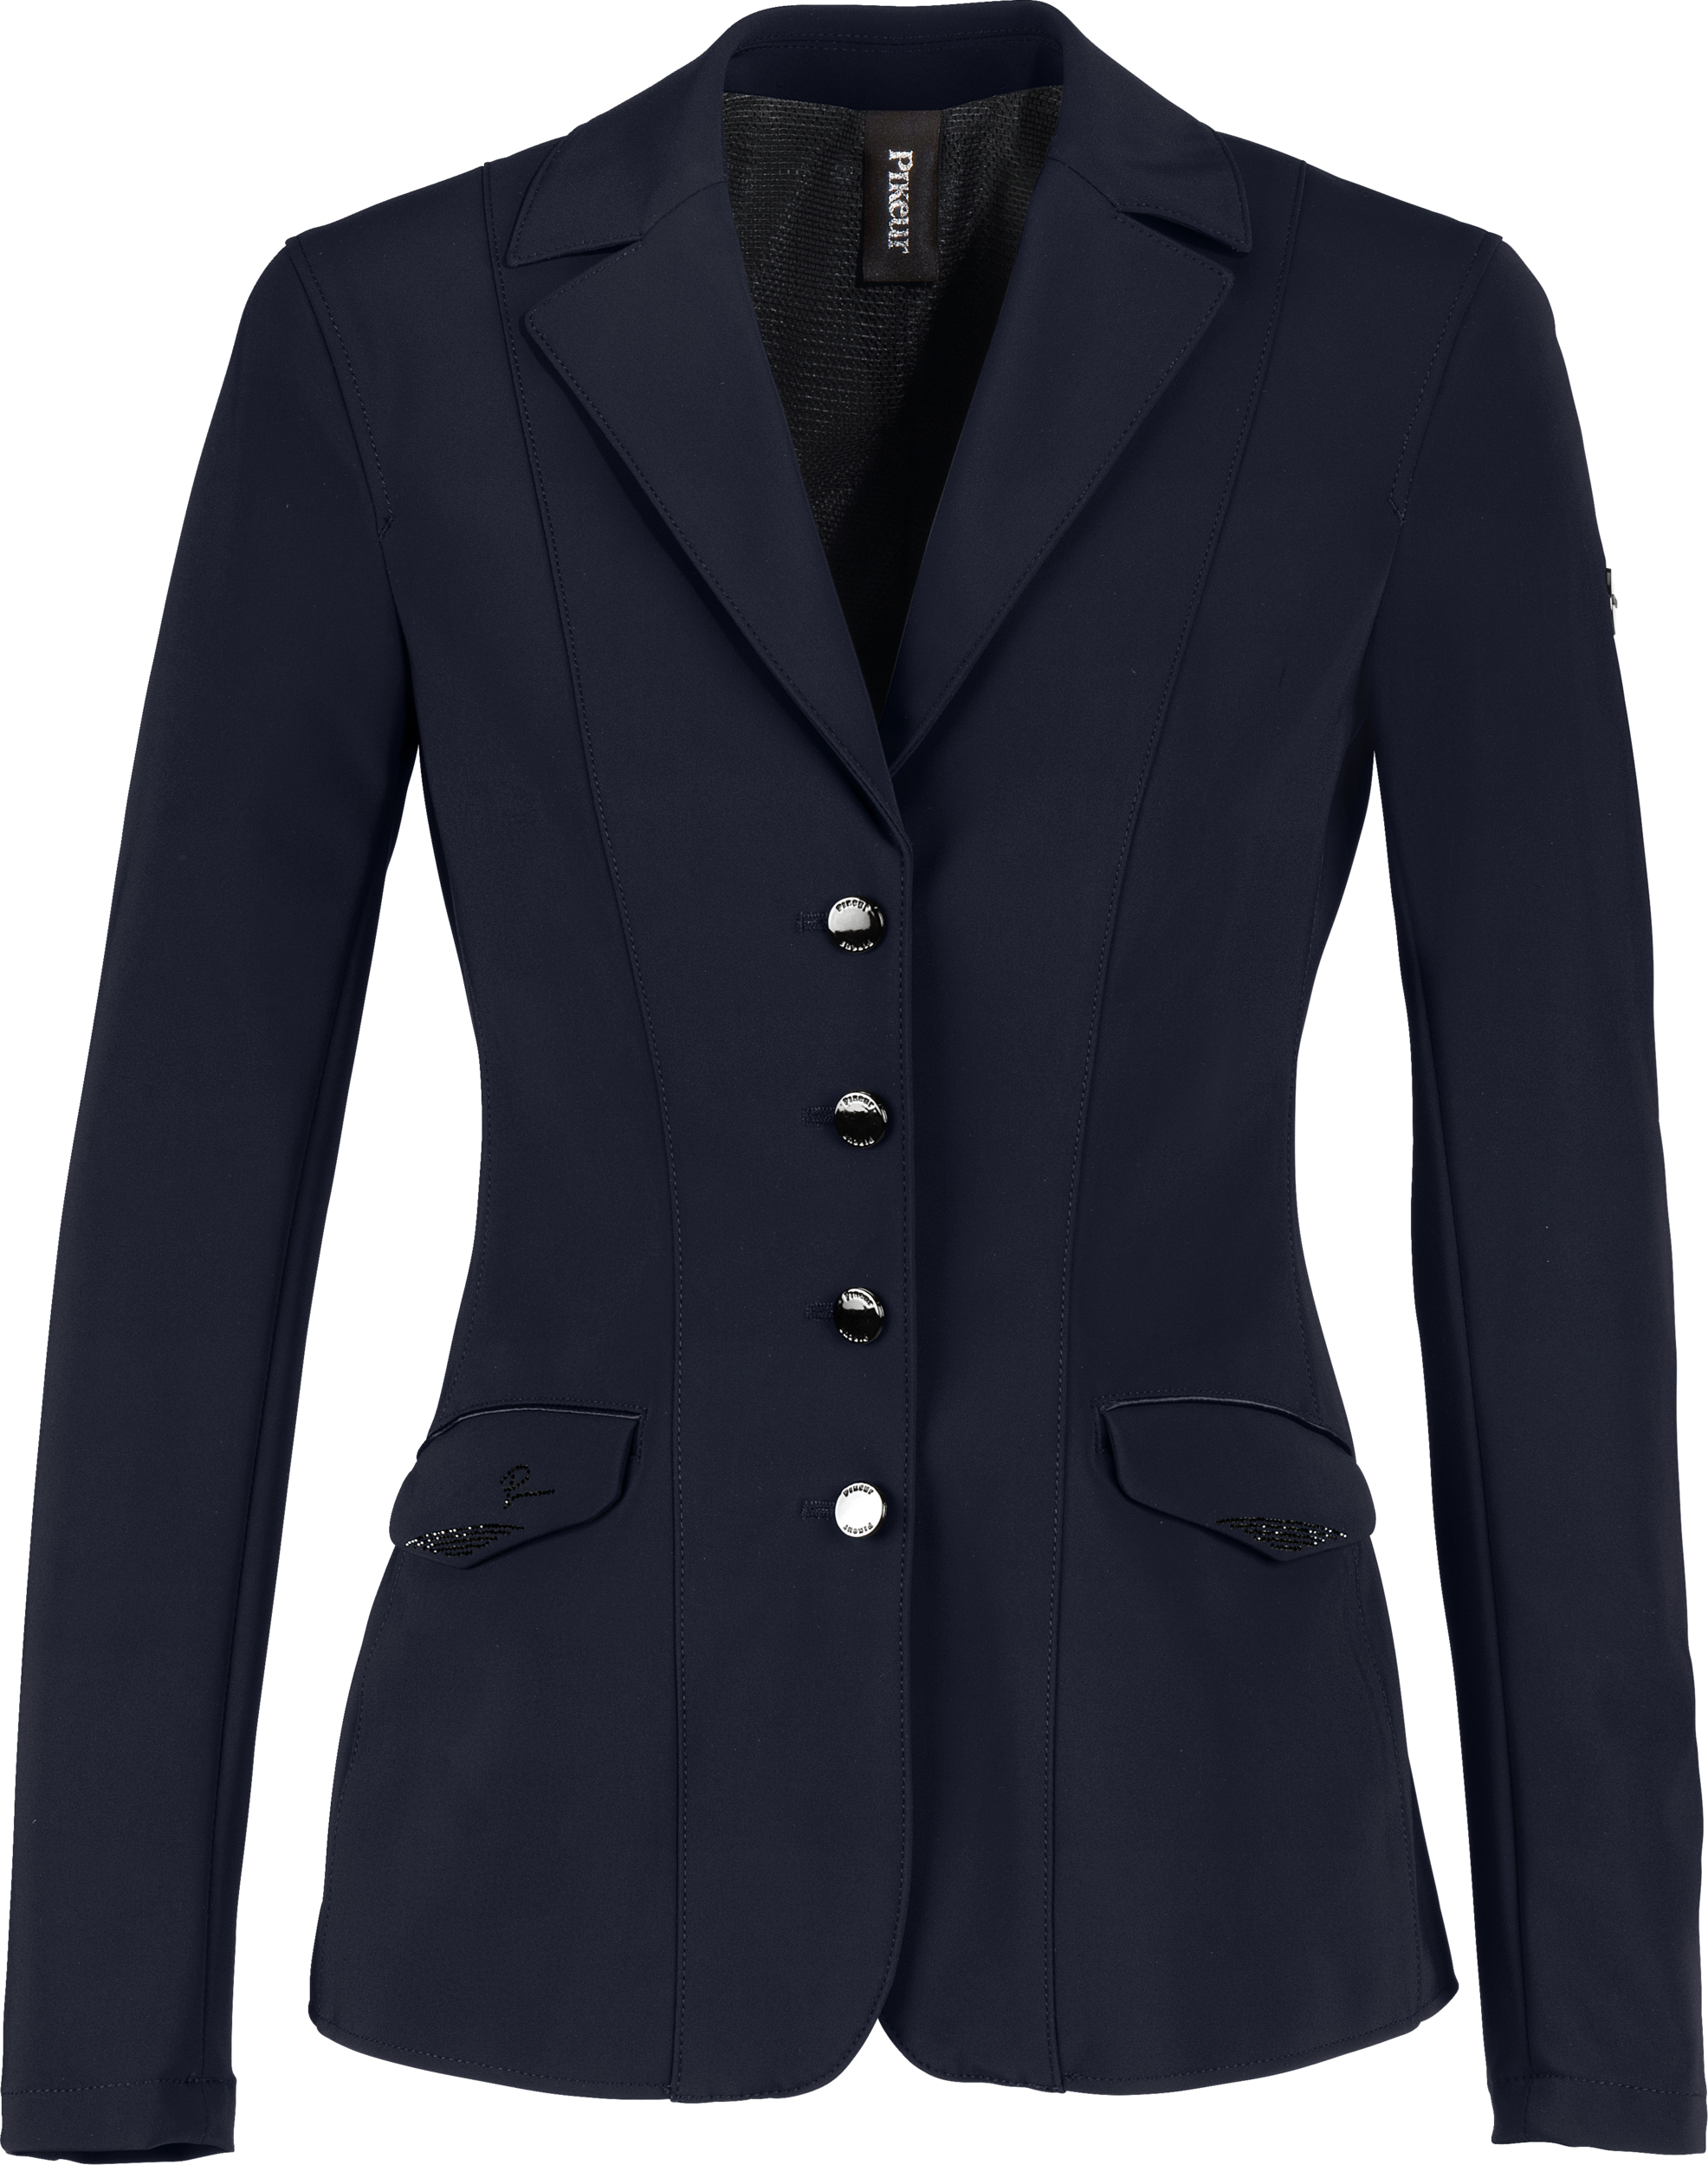 PIKEUR COMPETITION JACKET